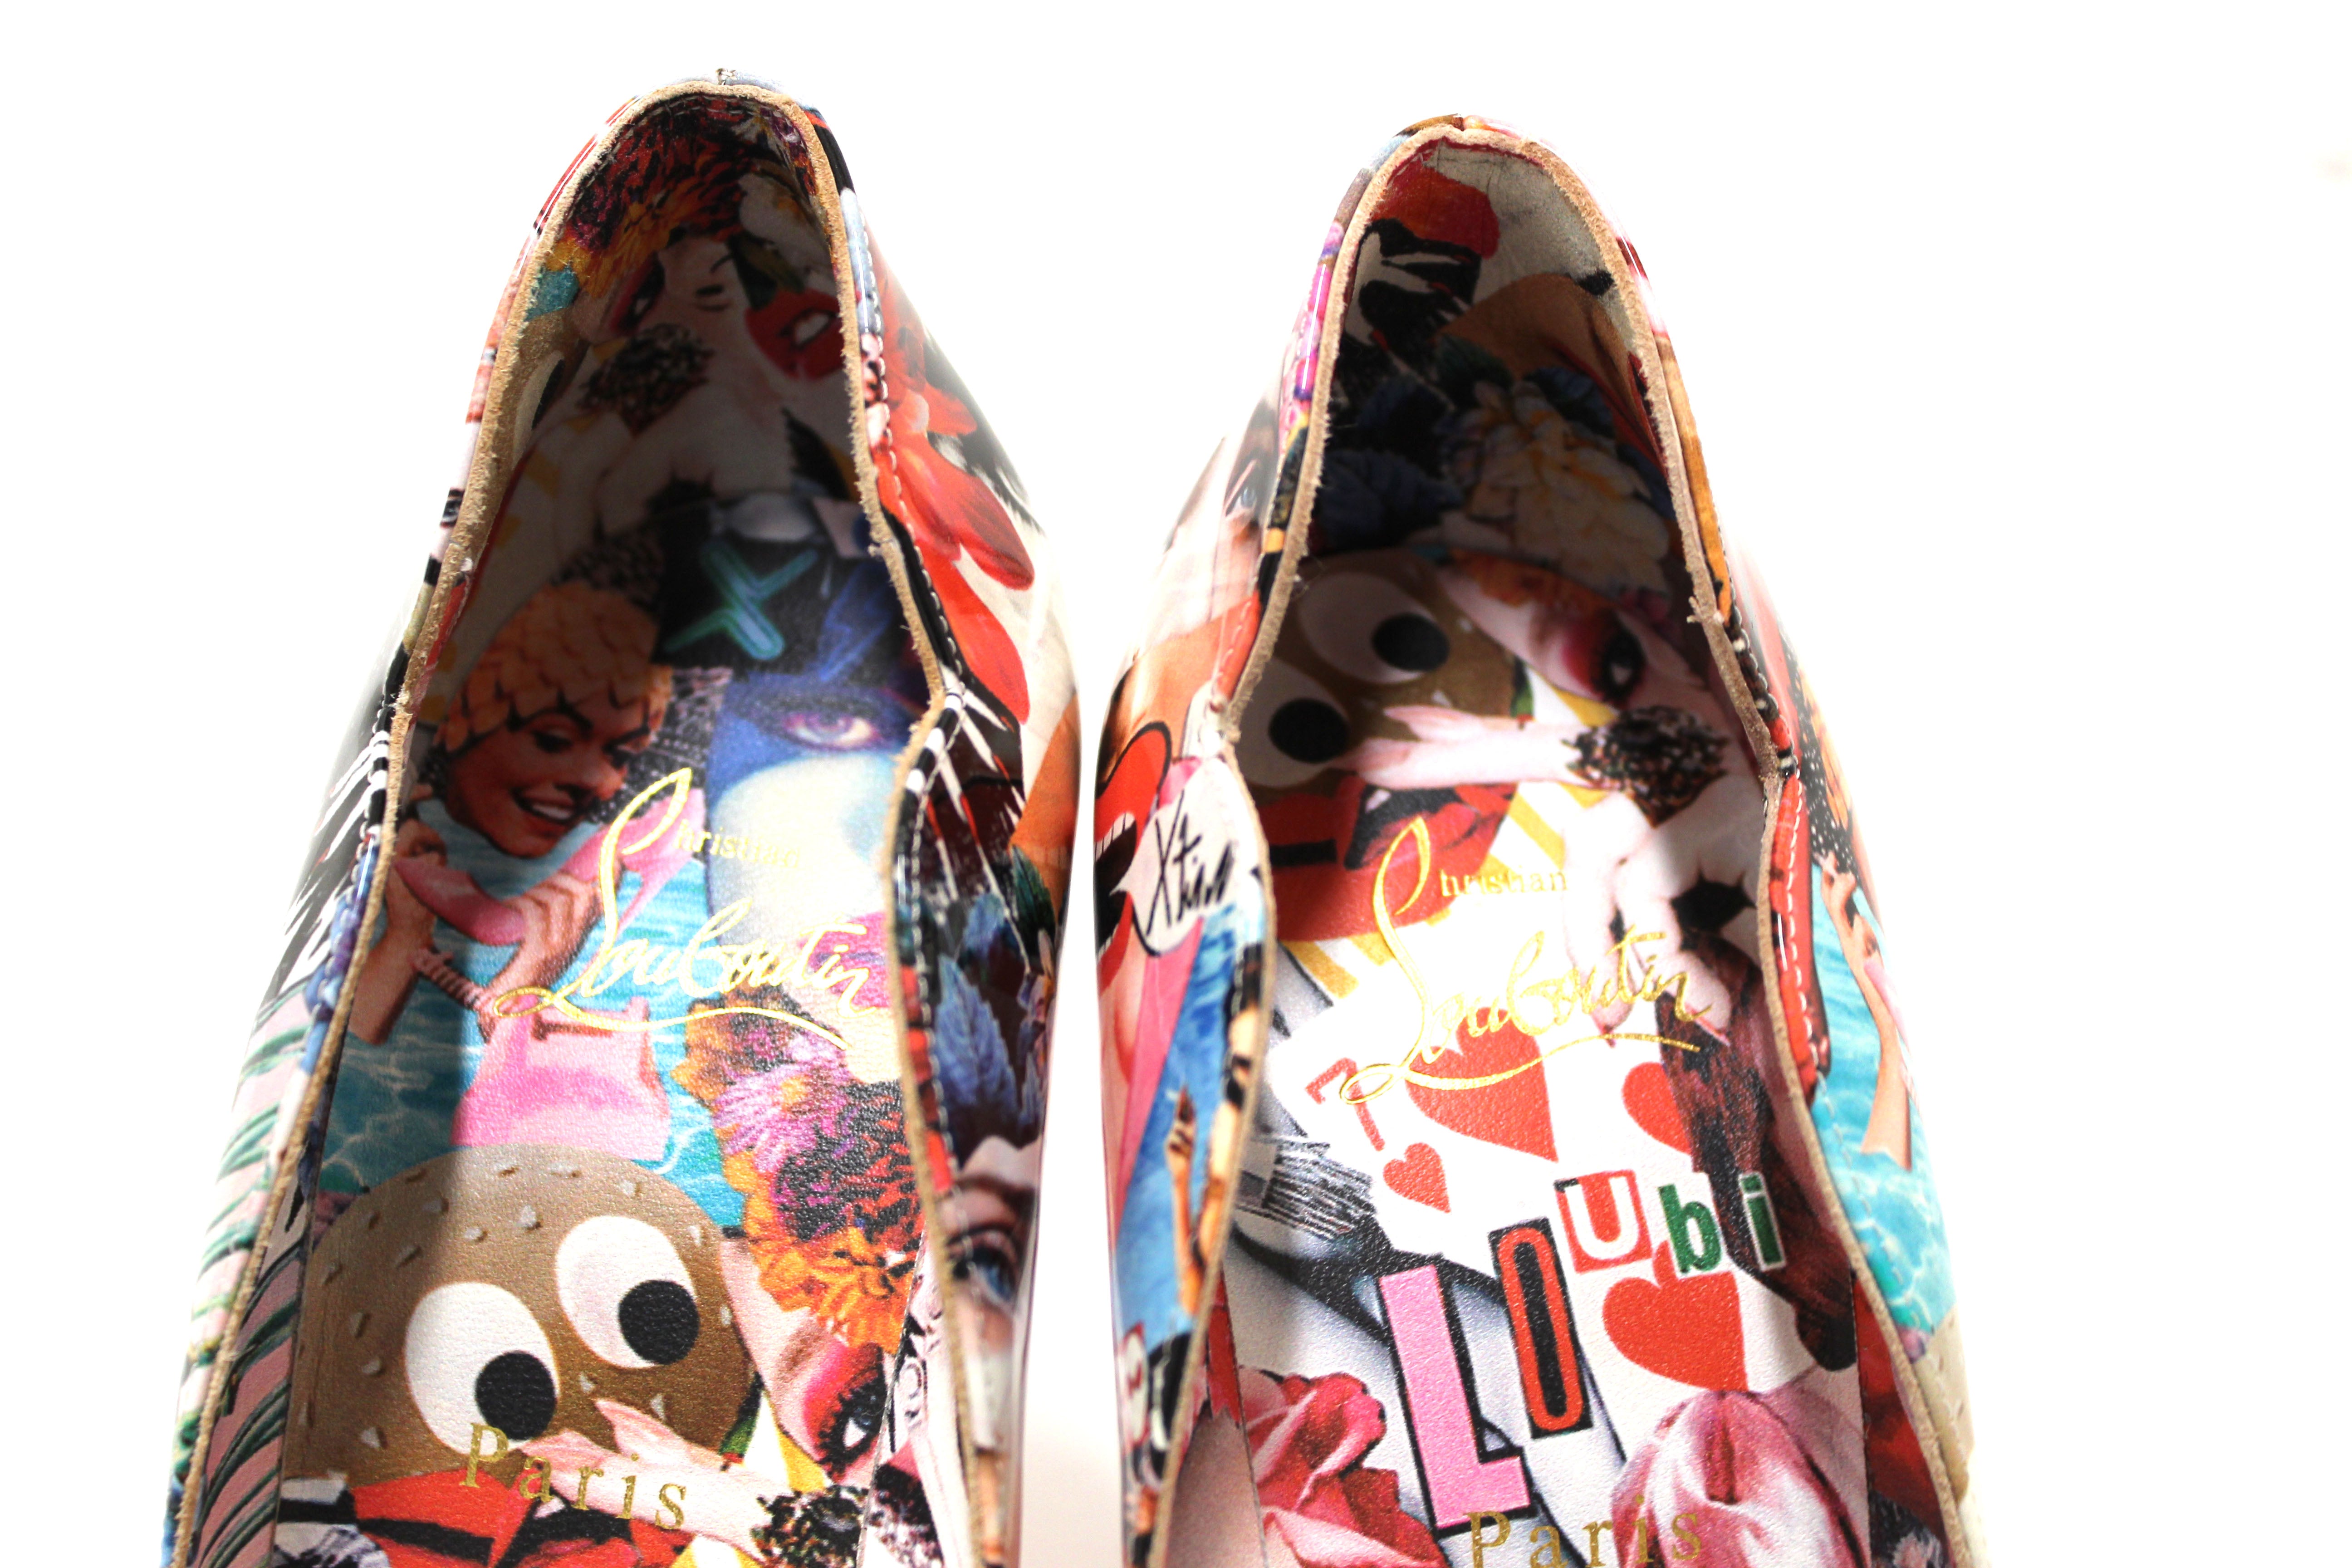 Authentic Christian Hot Chick Collage Print Patent Leather Pumps Size 38.5